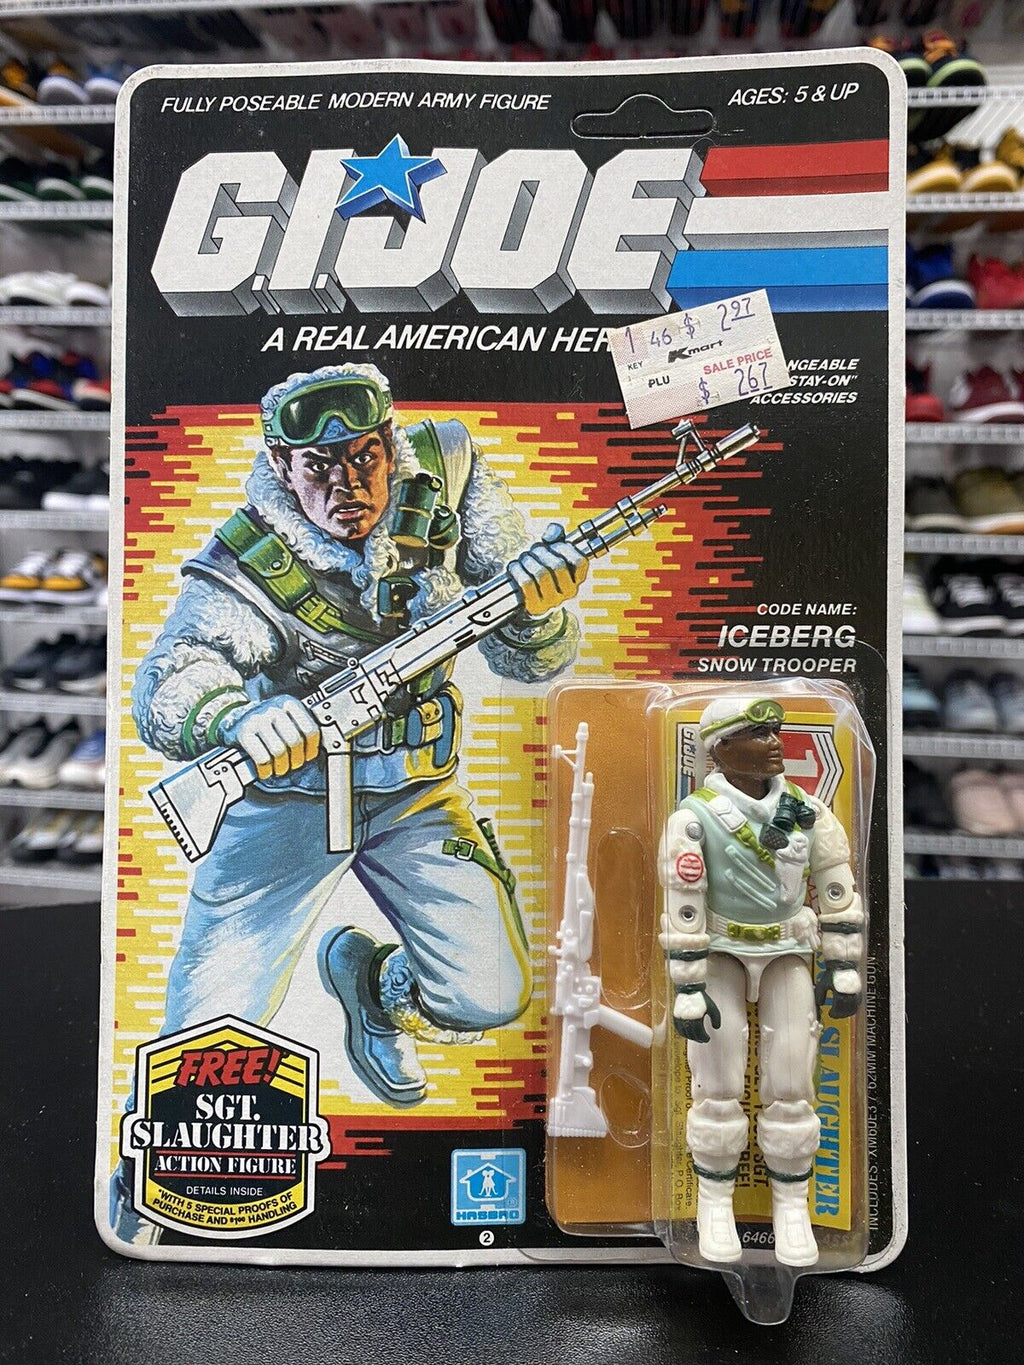 Vintage 1986 Hasbro GI Joe Iceberg Action Figure New And UNPUNCHED - Hype Stew Sneakers Detroit